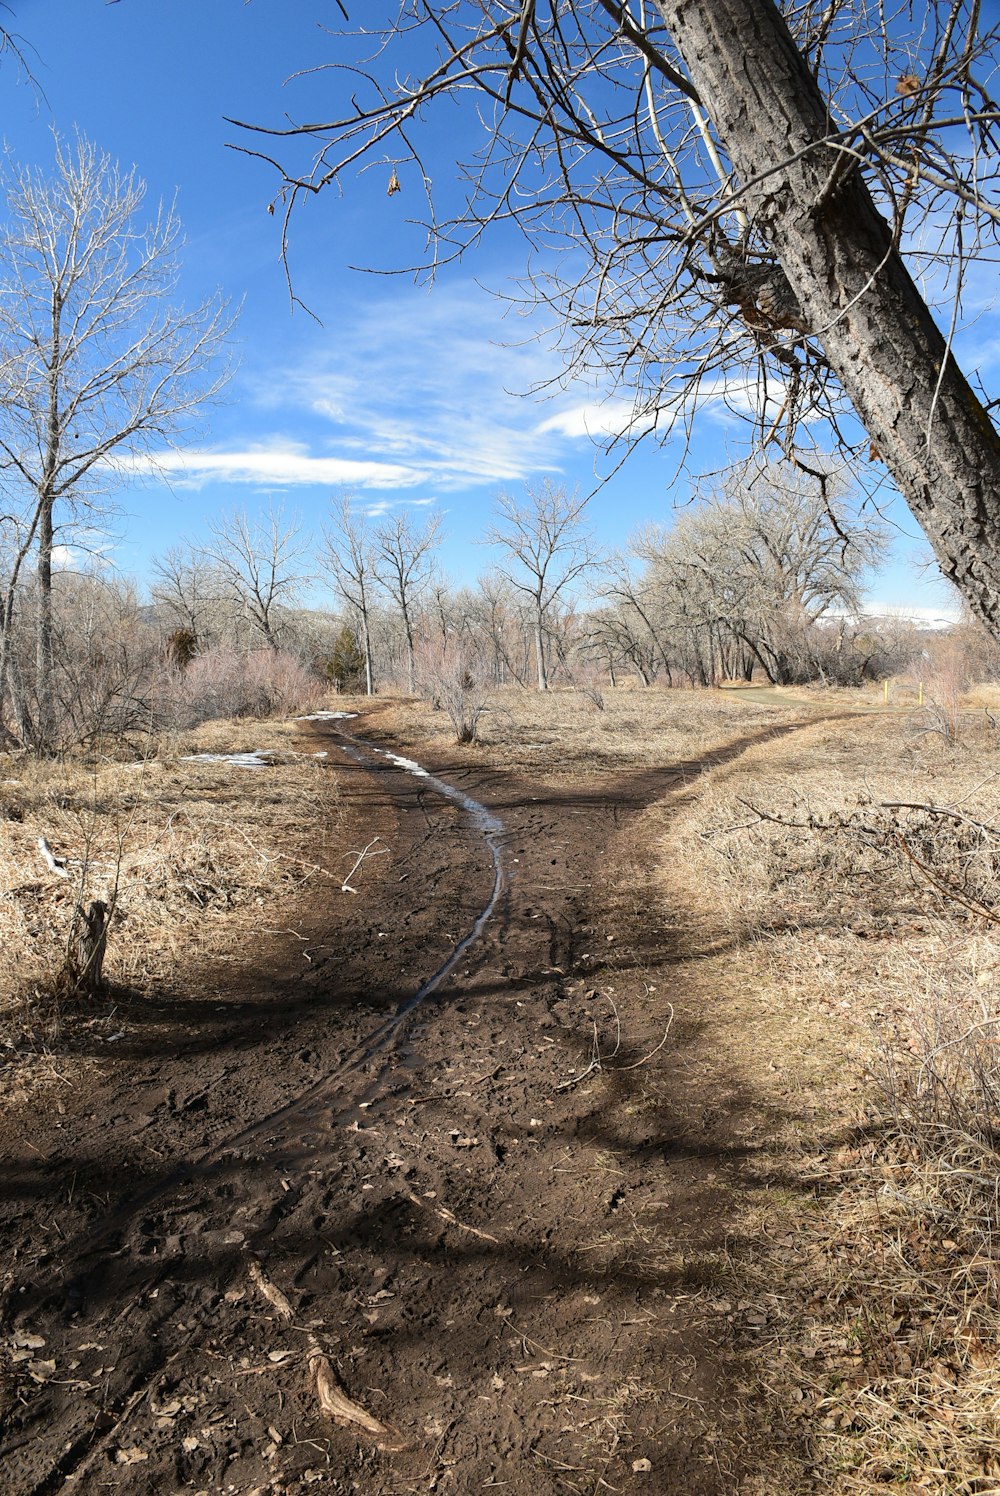 a dirt road surrounded by bare trees on a sunny day